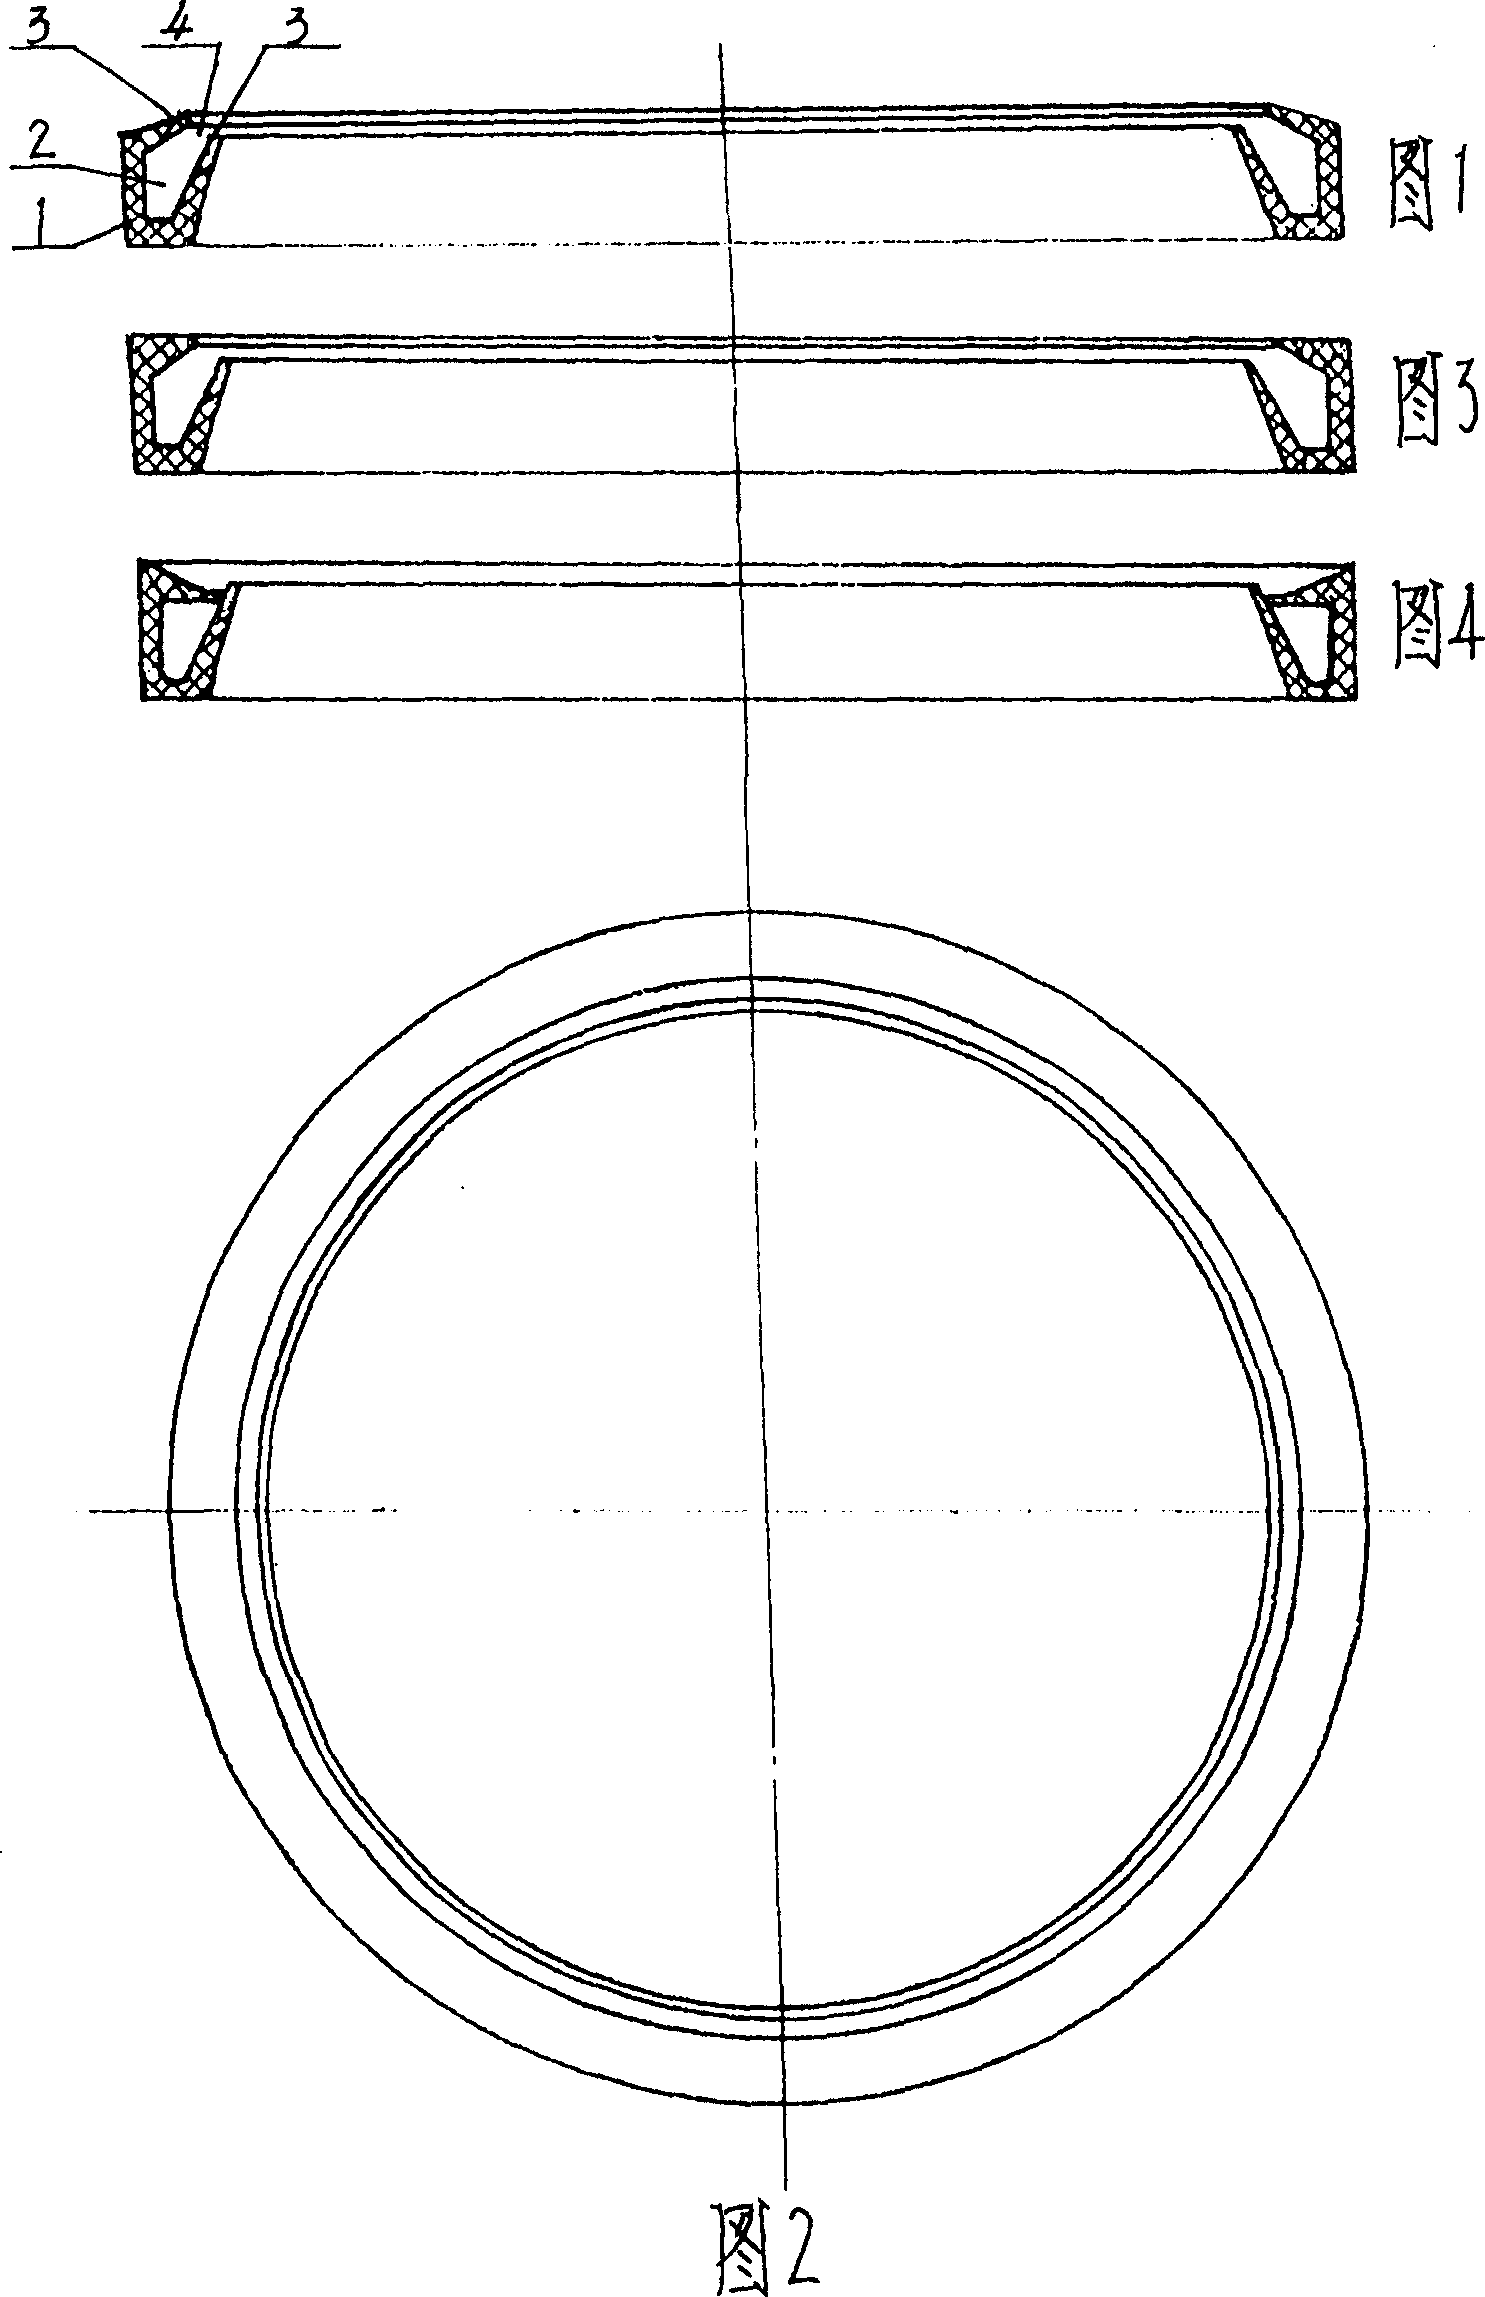 Seal ring sealing with pressure and releasing without pressure